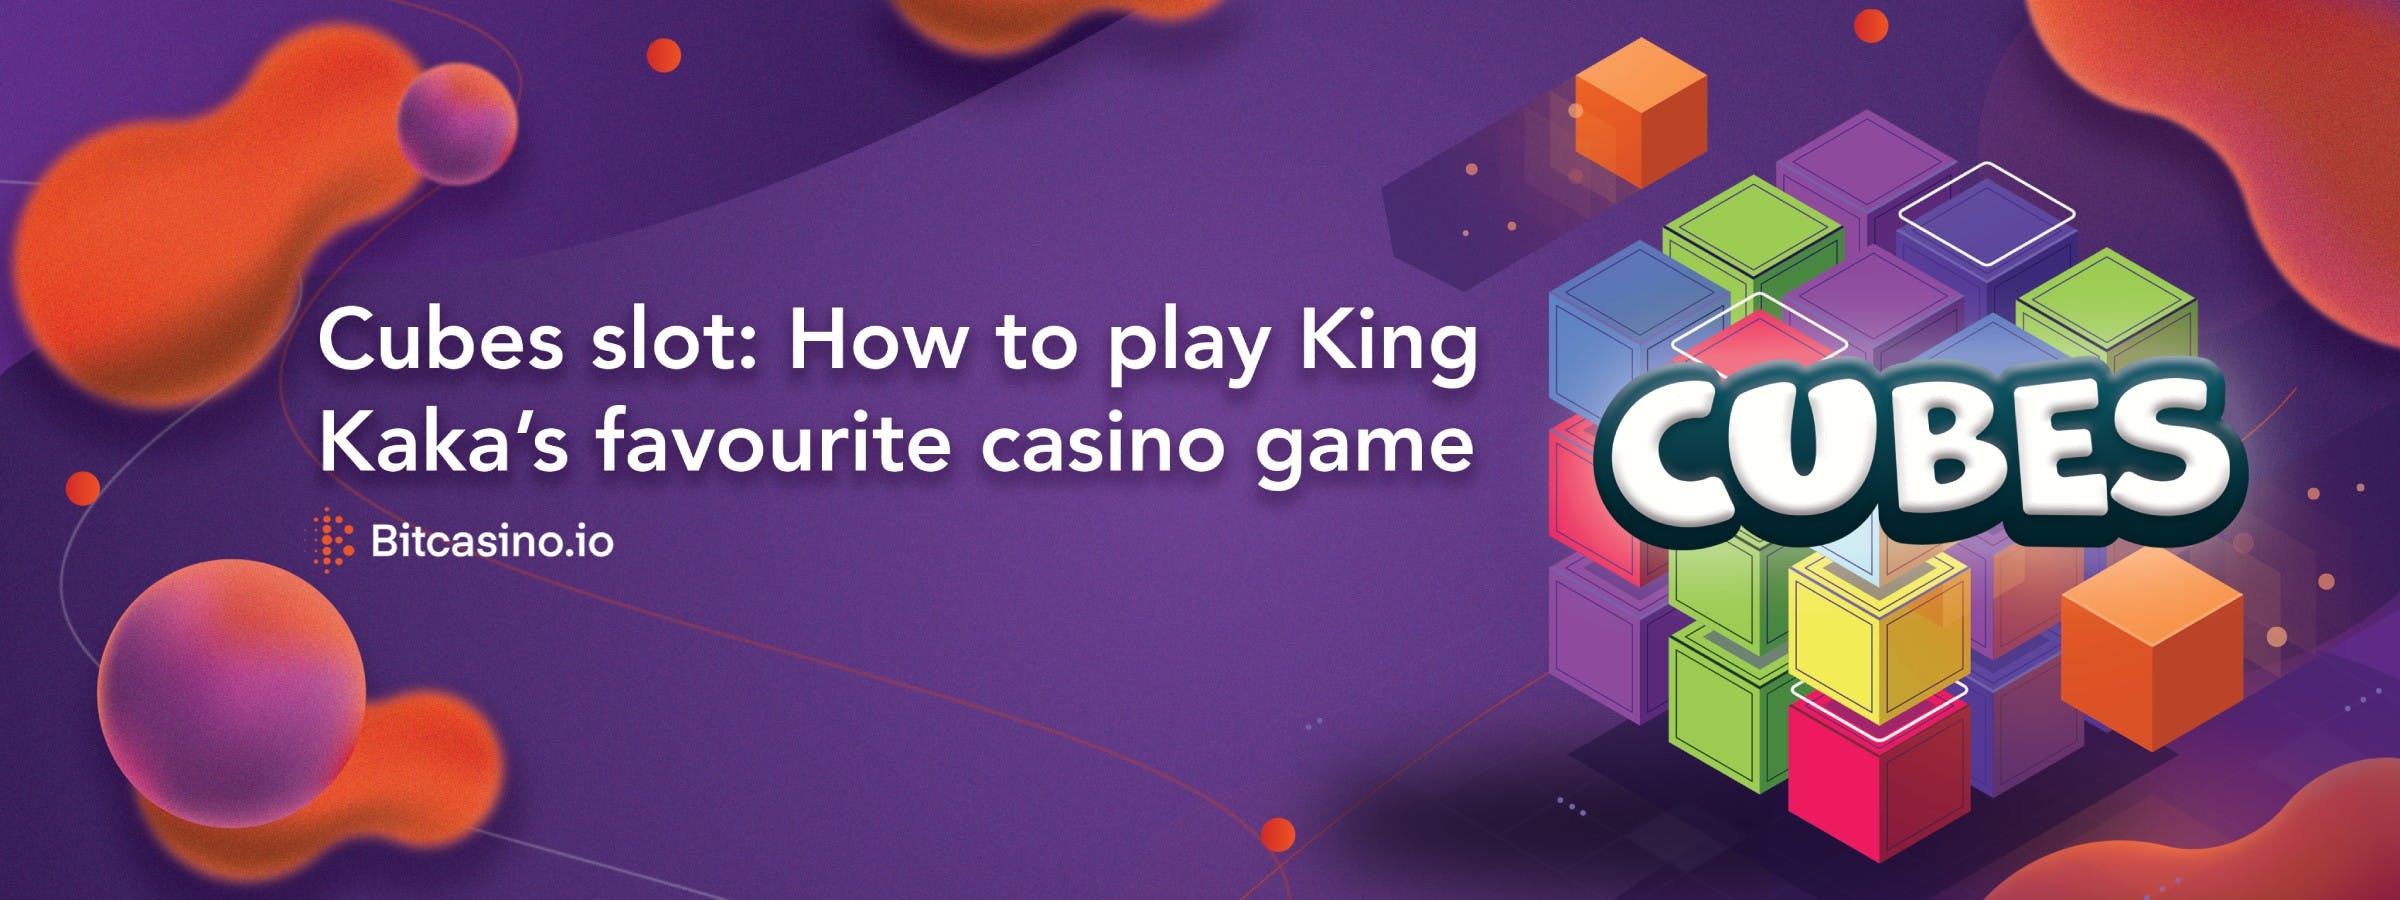 Cubes slot: How to play King Kaka’s favourite casino game